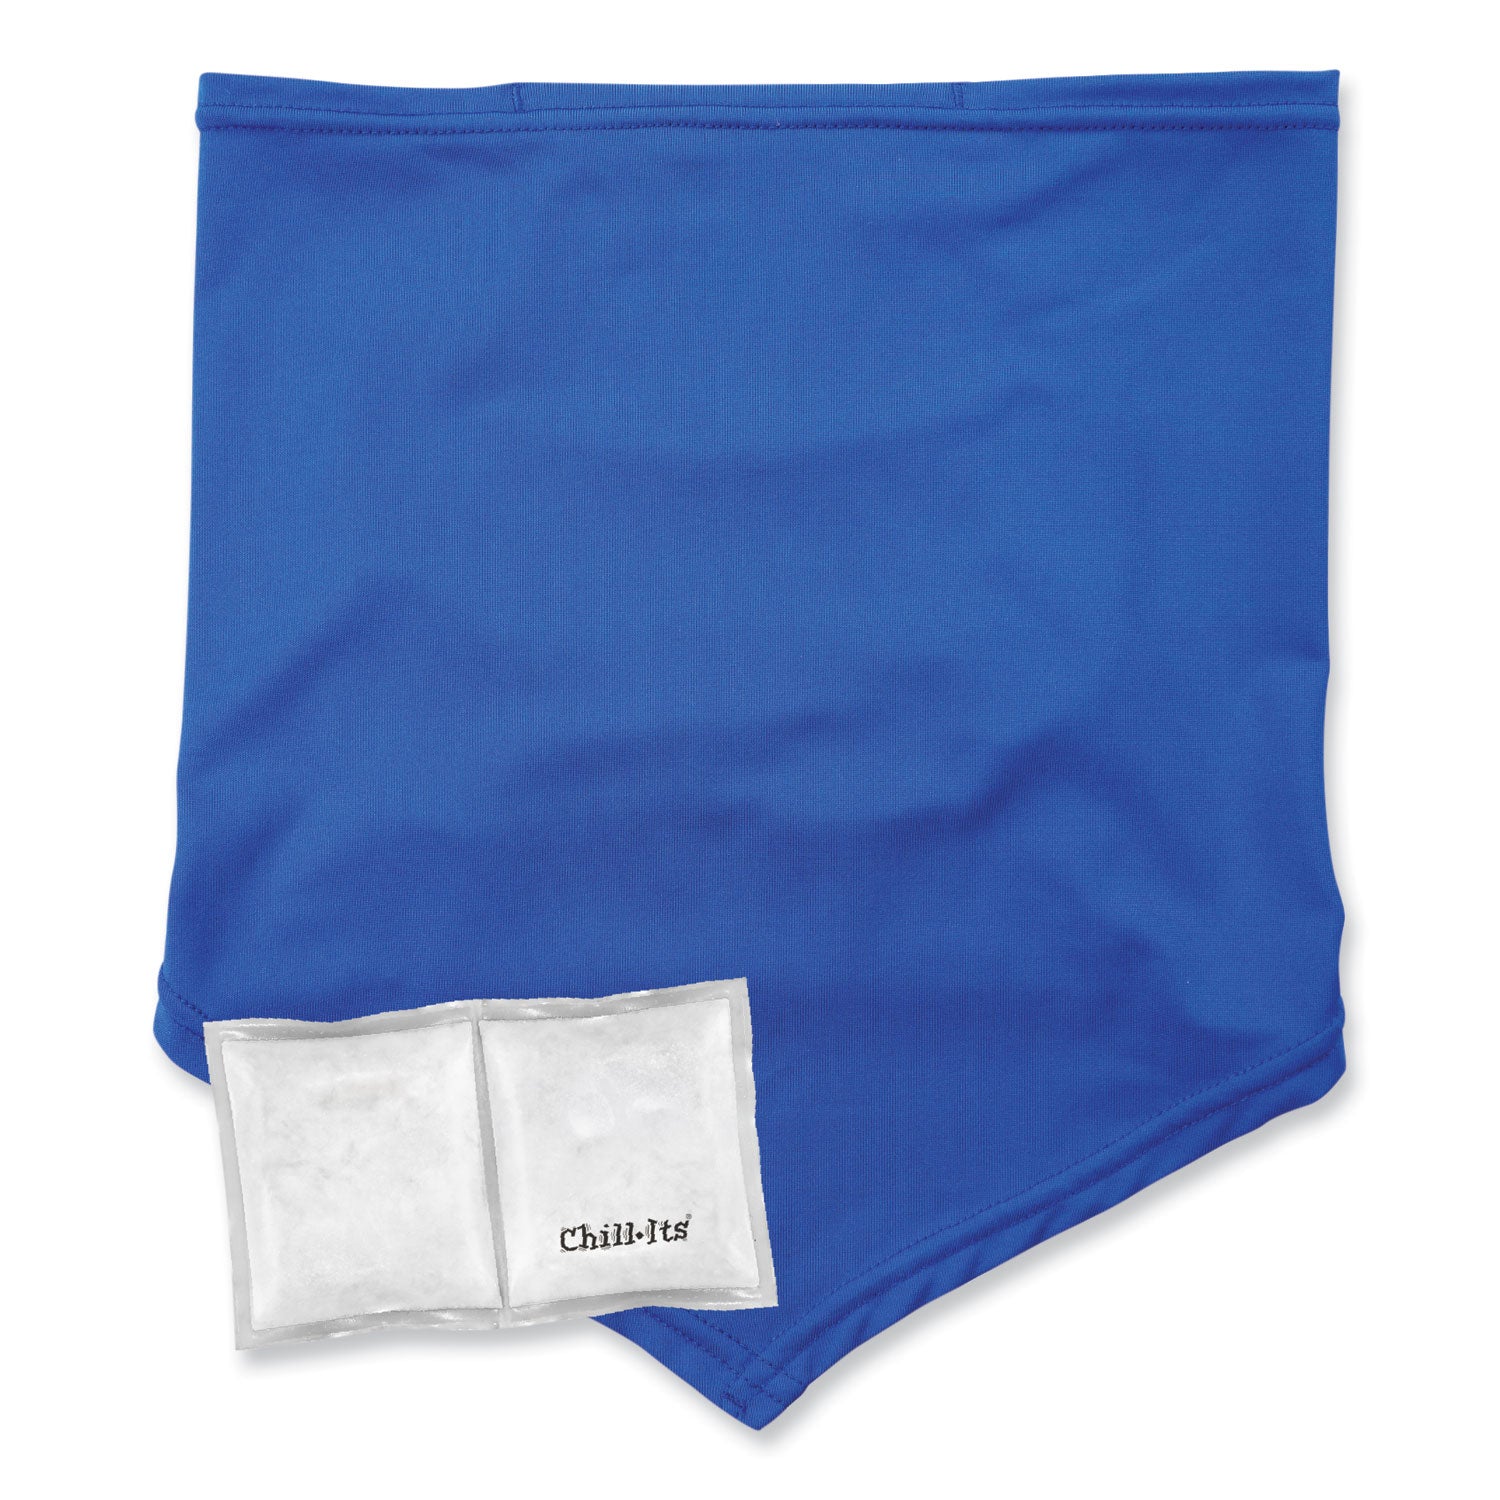 chill-its-6482-cooling-neck-gaiter-bandana-pocket-kit-polyester-spandex-small-medium-blue-ships-in-1-3-business-days_ego42135 - 1